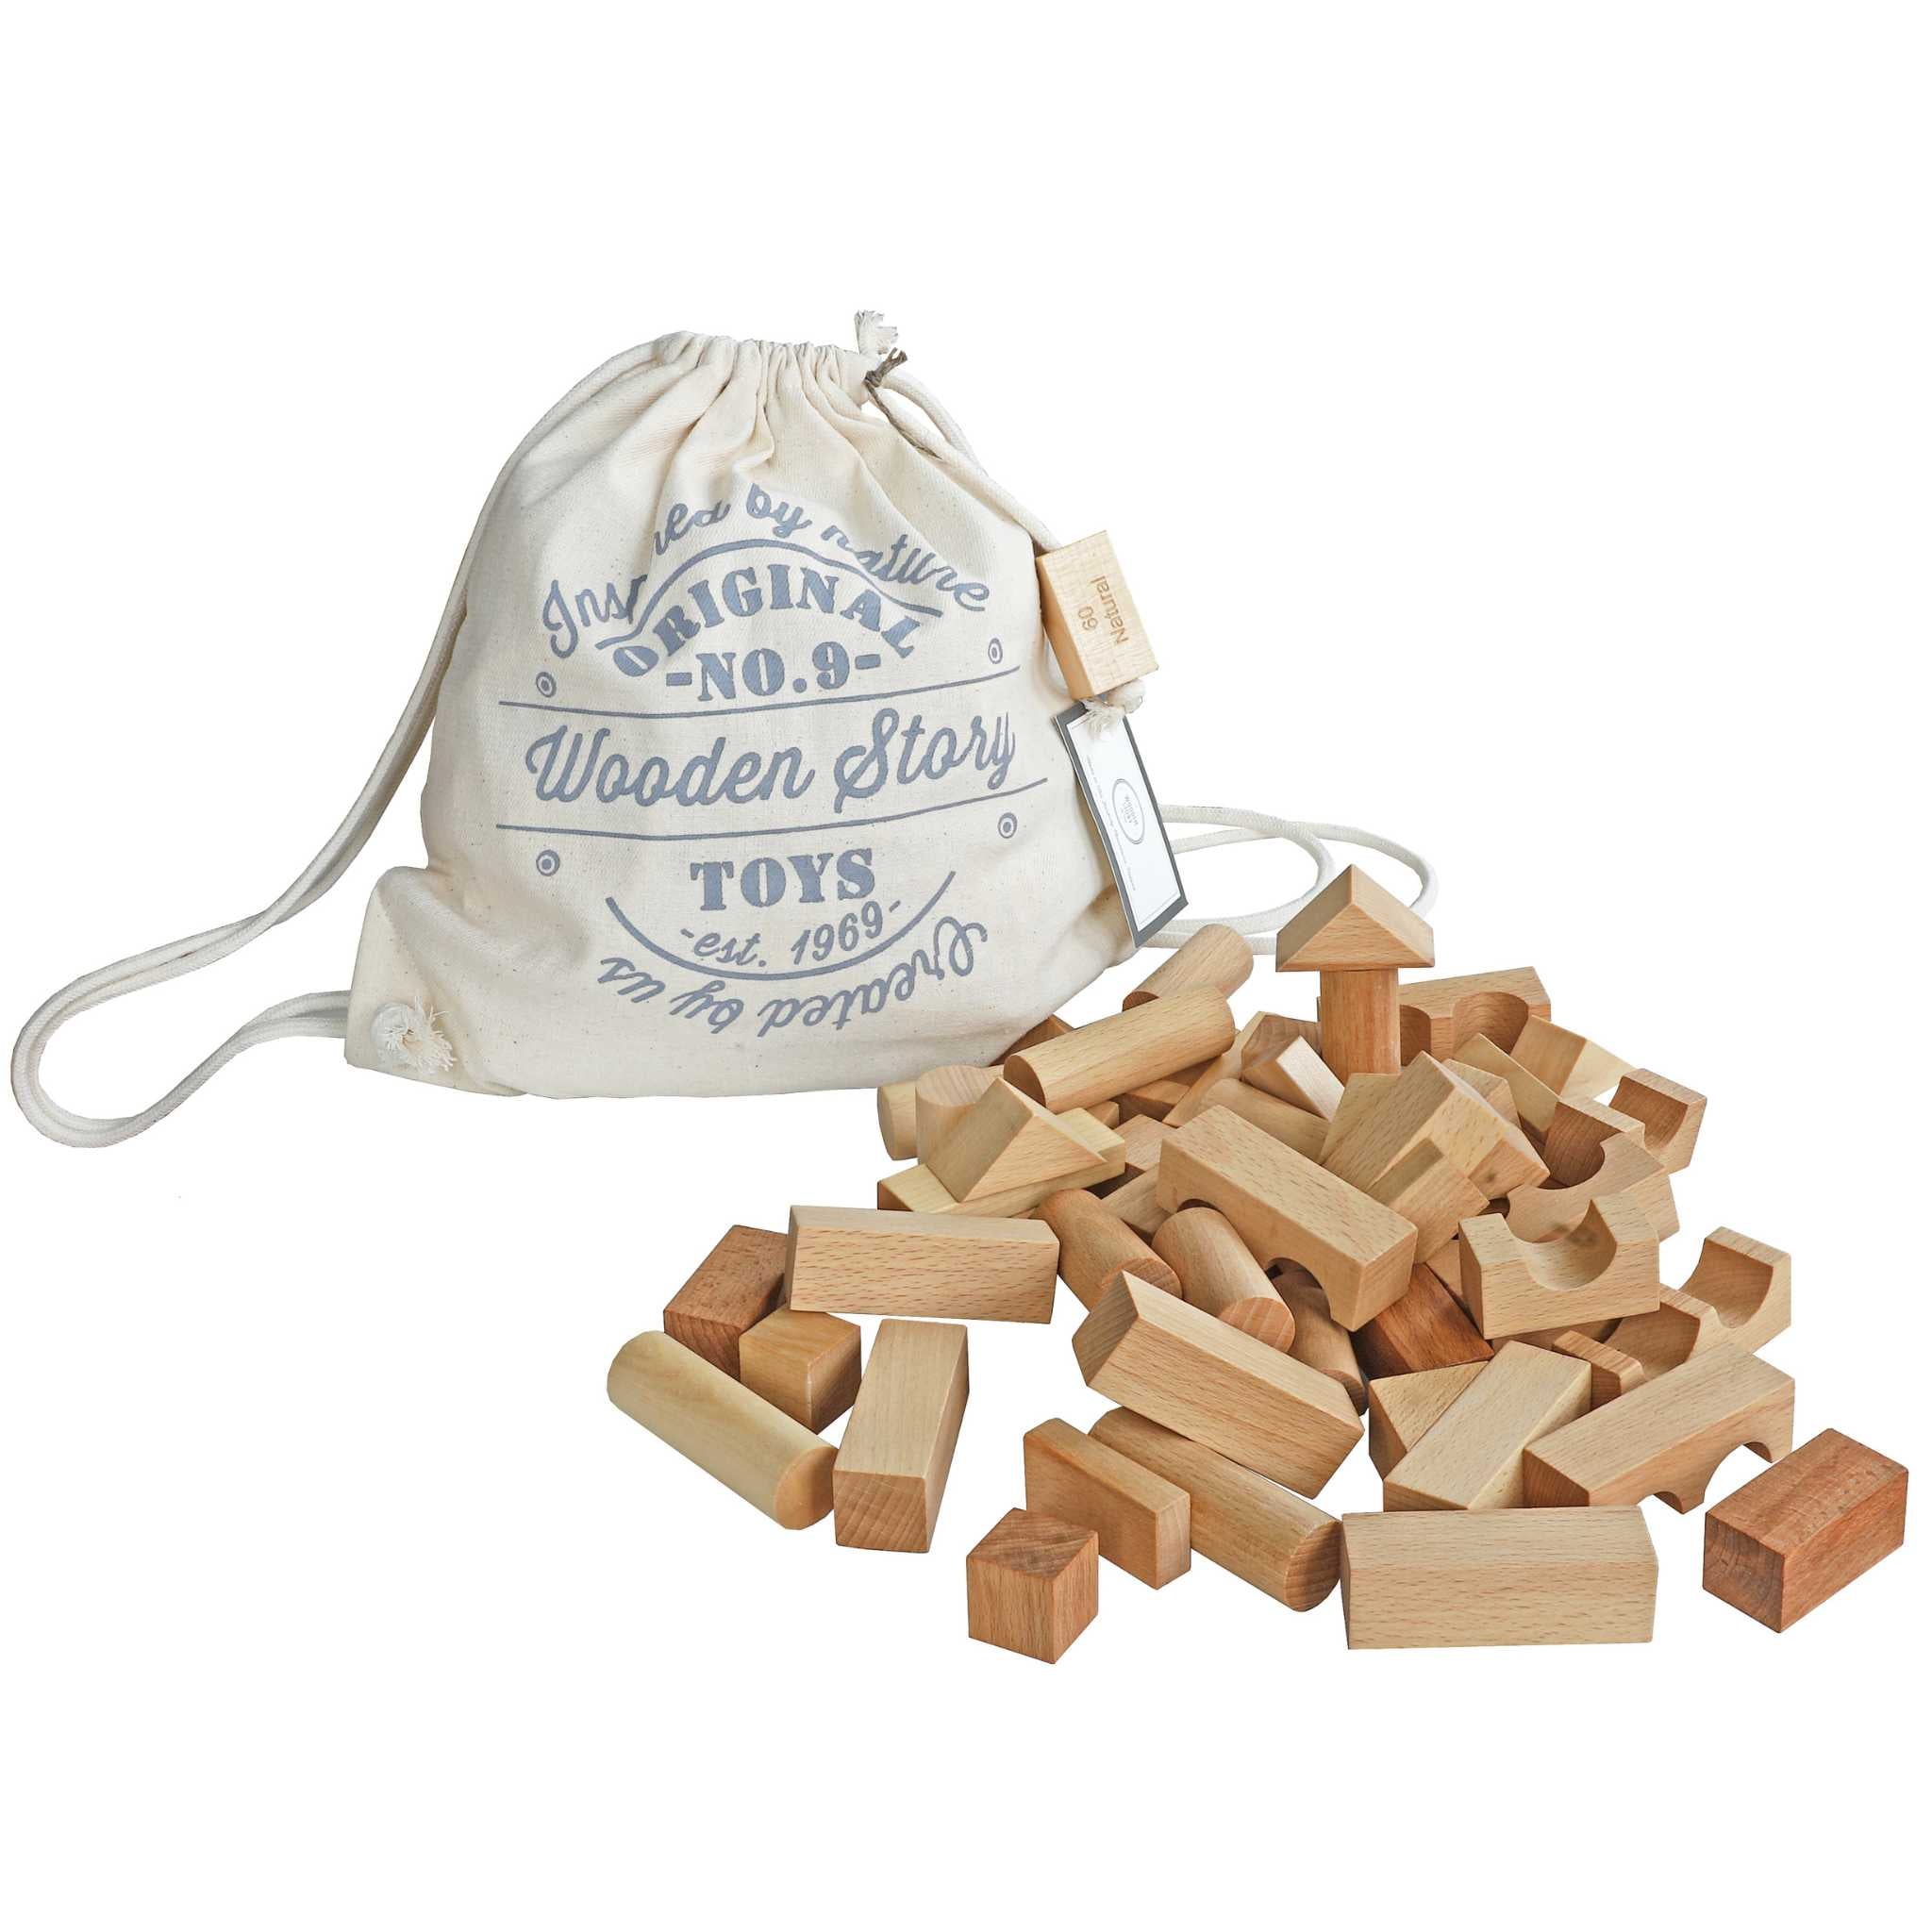 Wooden Story Natural Building Blocks in Sack - 60 Pieces